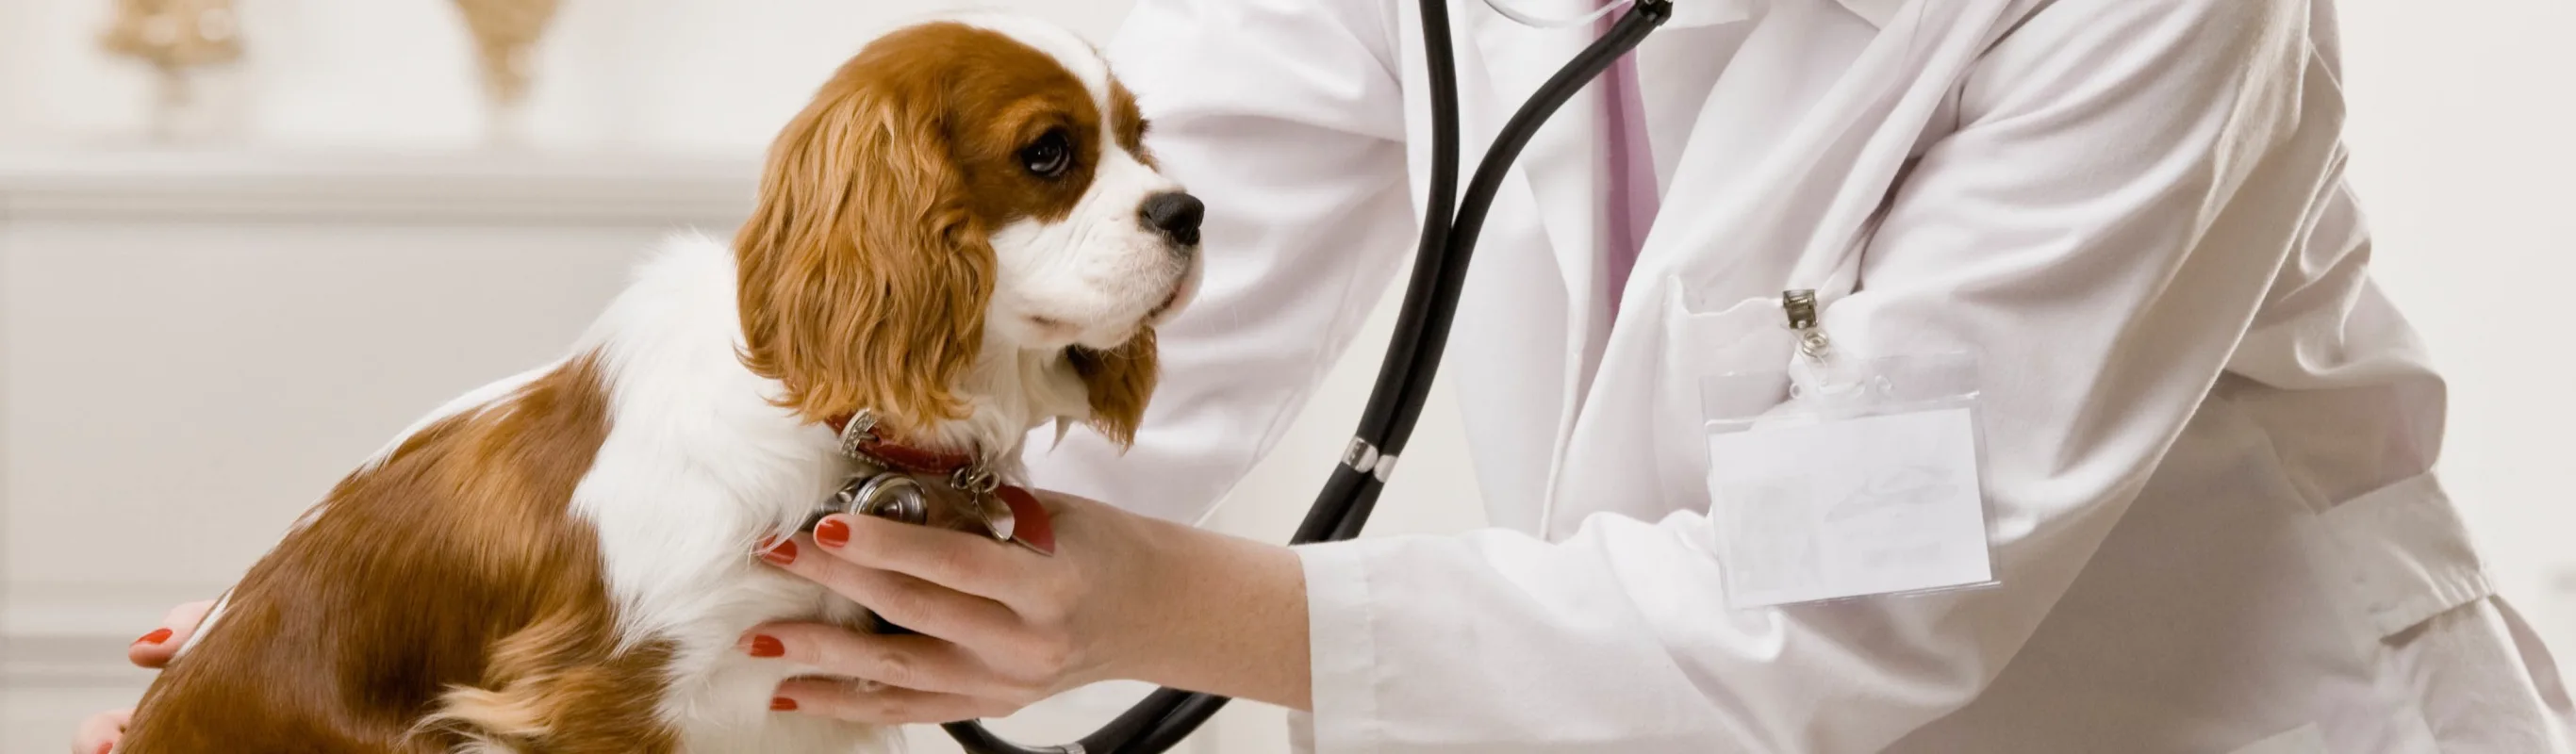 Veterinary staff examining a dog with a stethoscope